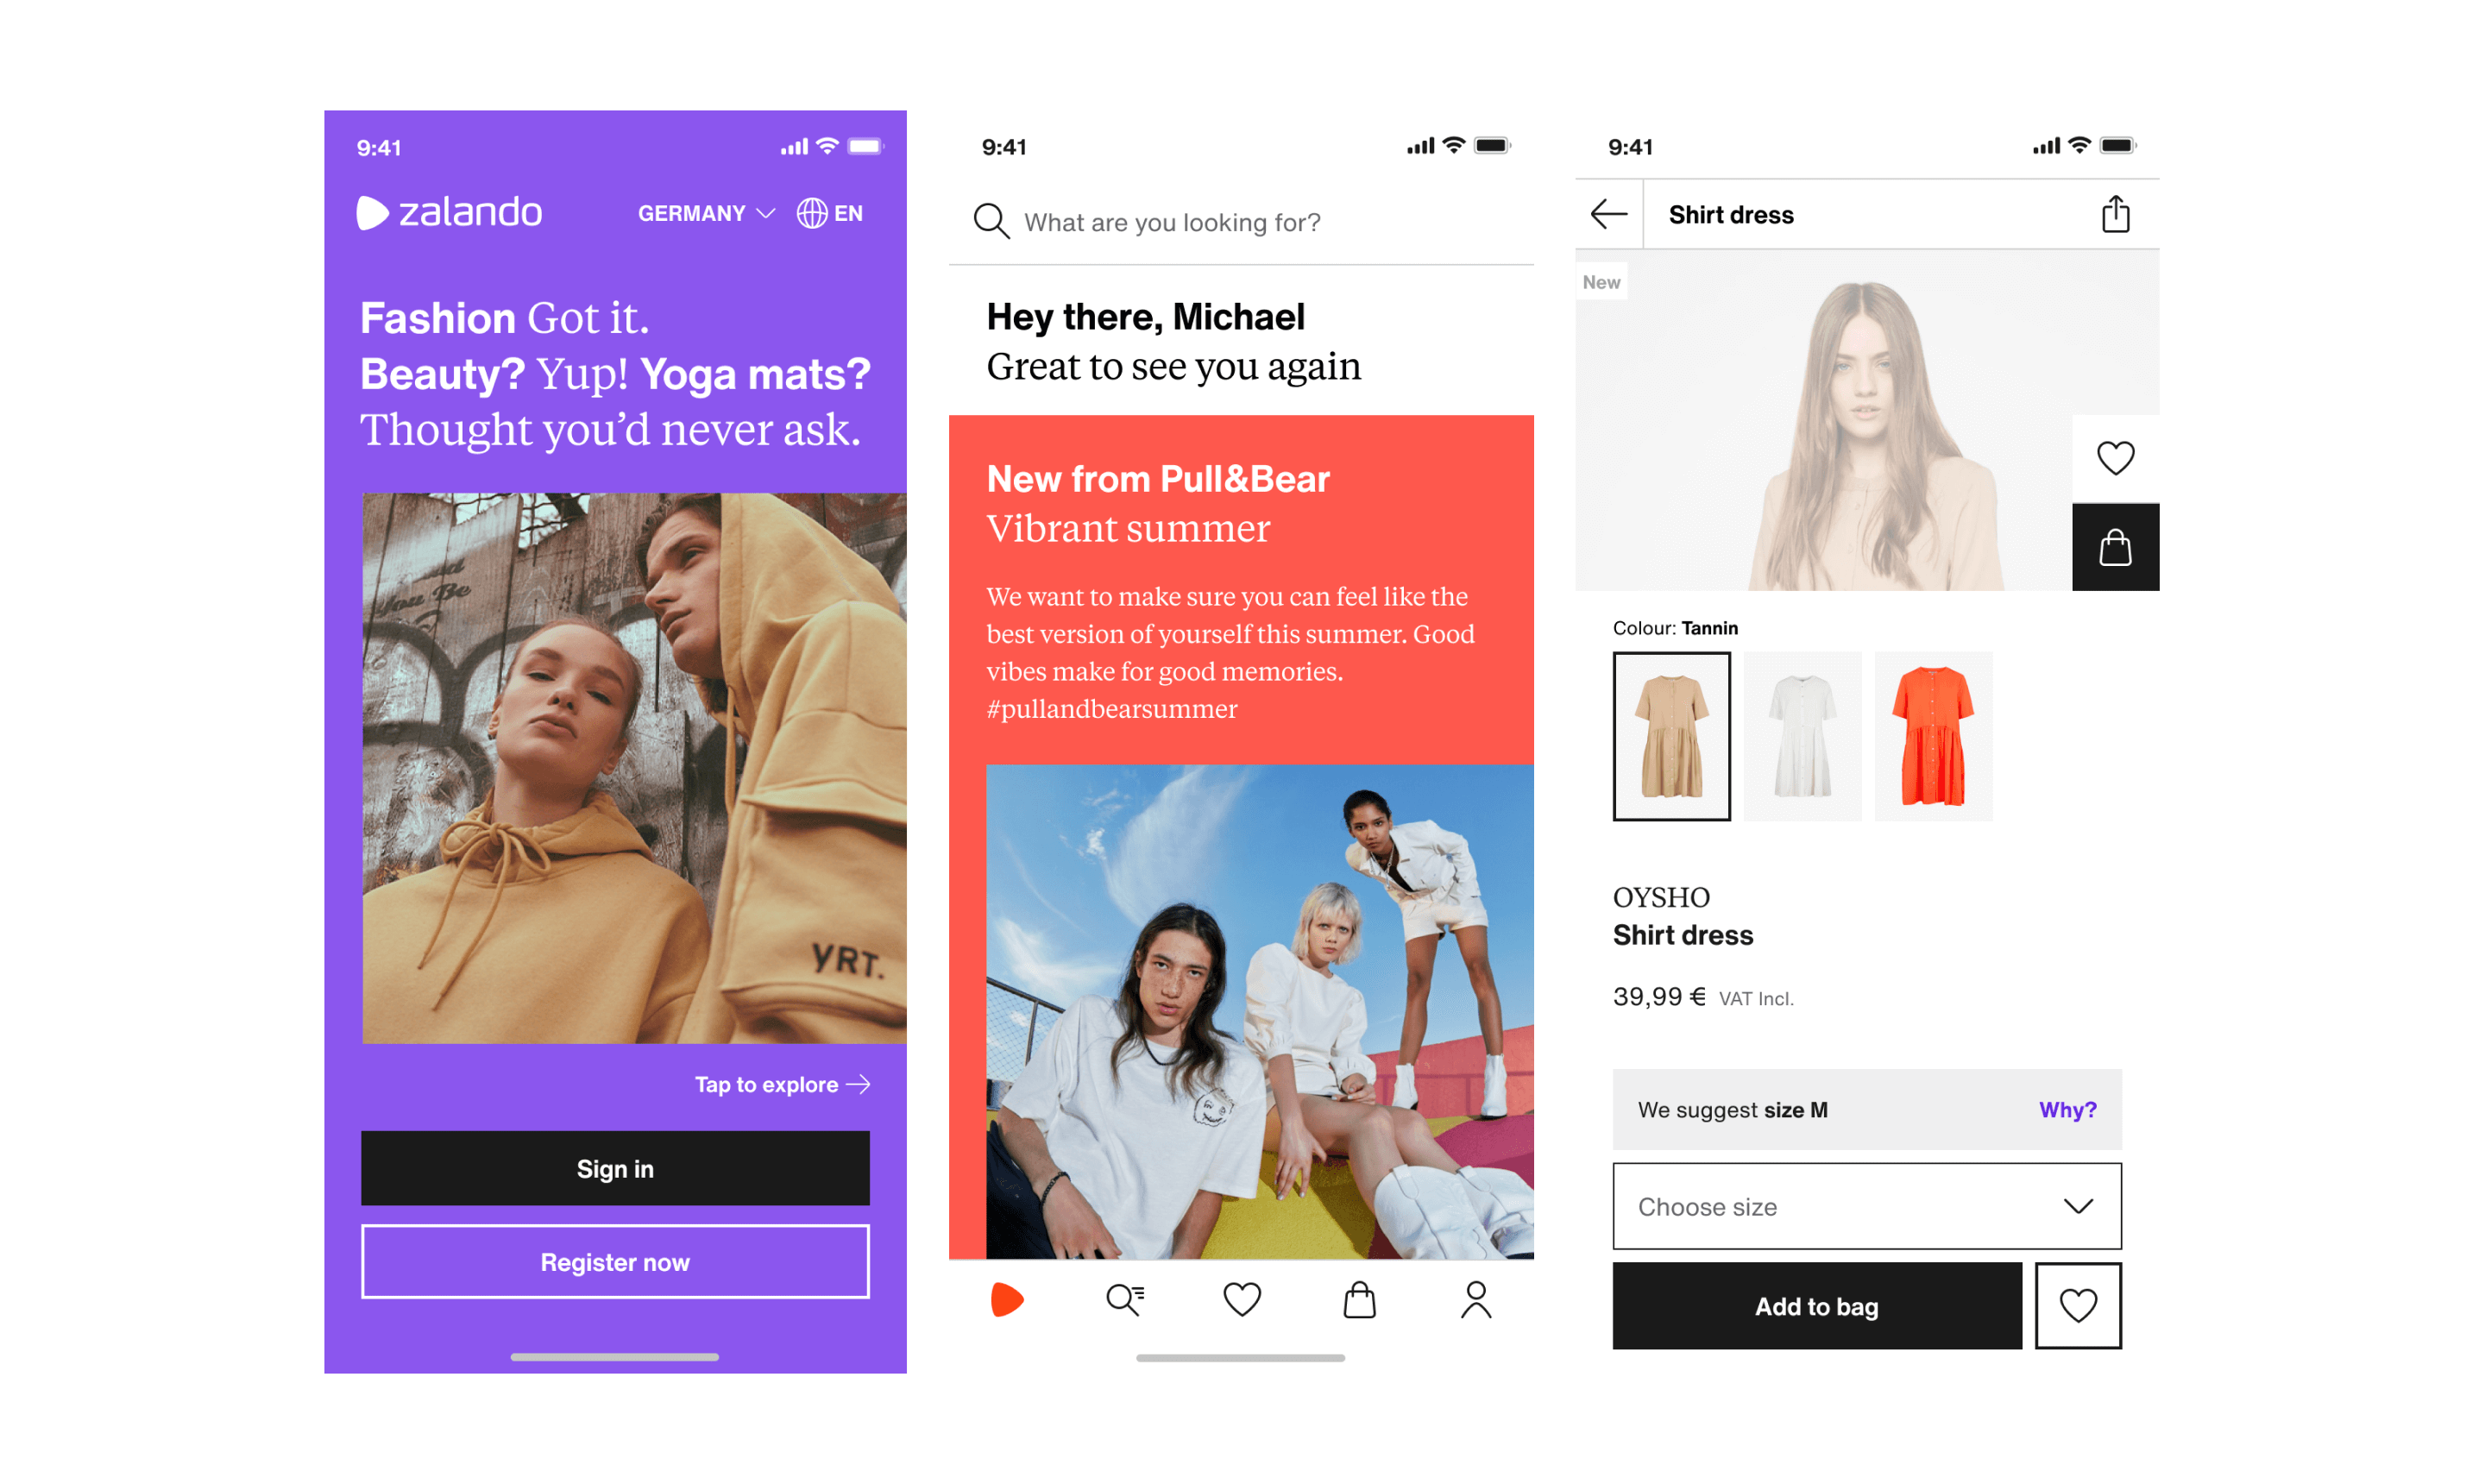 A few examples of the type pairing in the current experience on the Zalando app